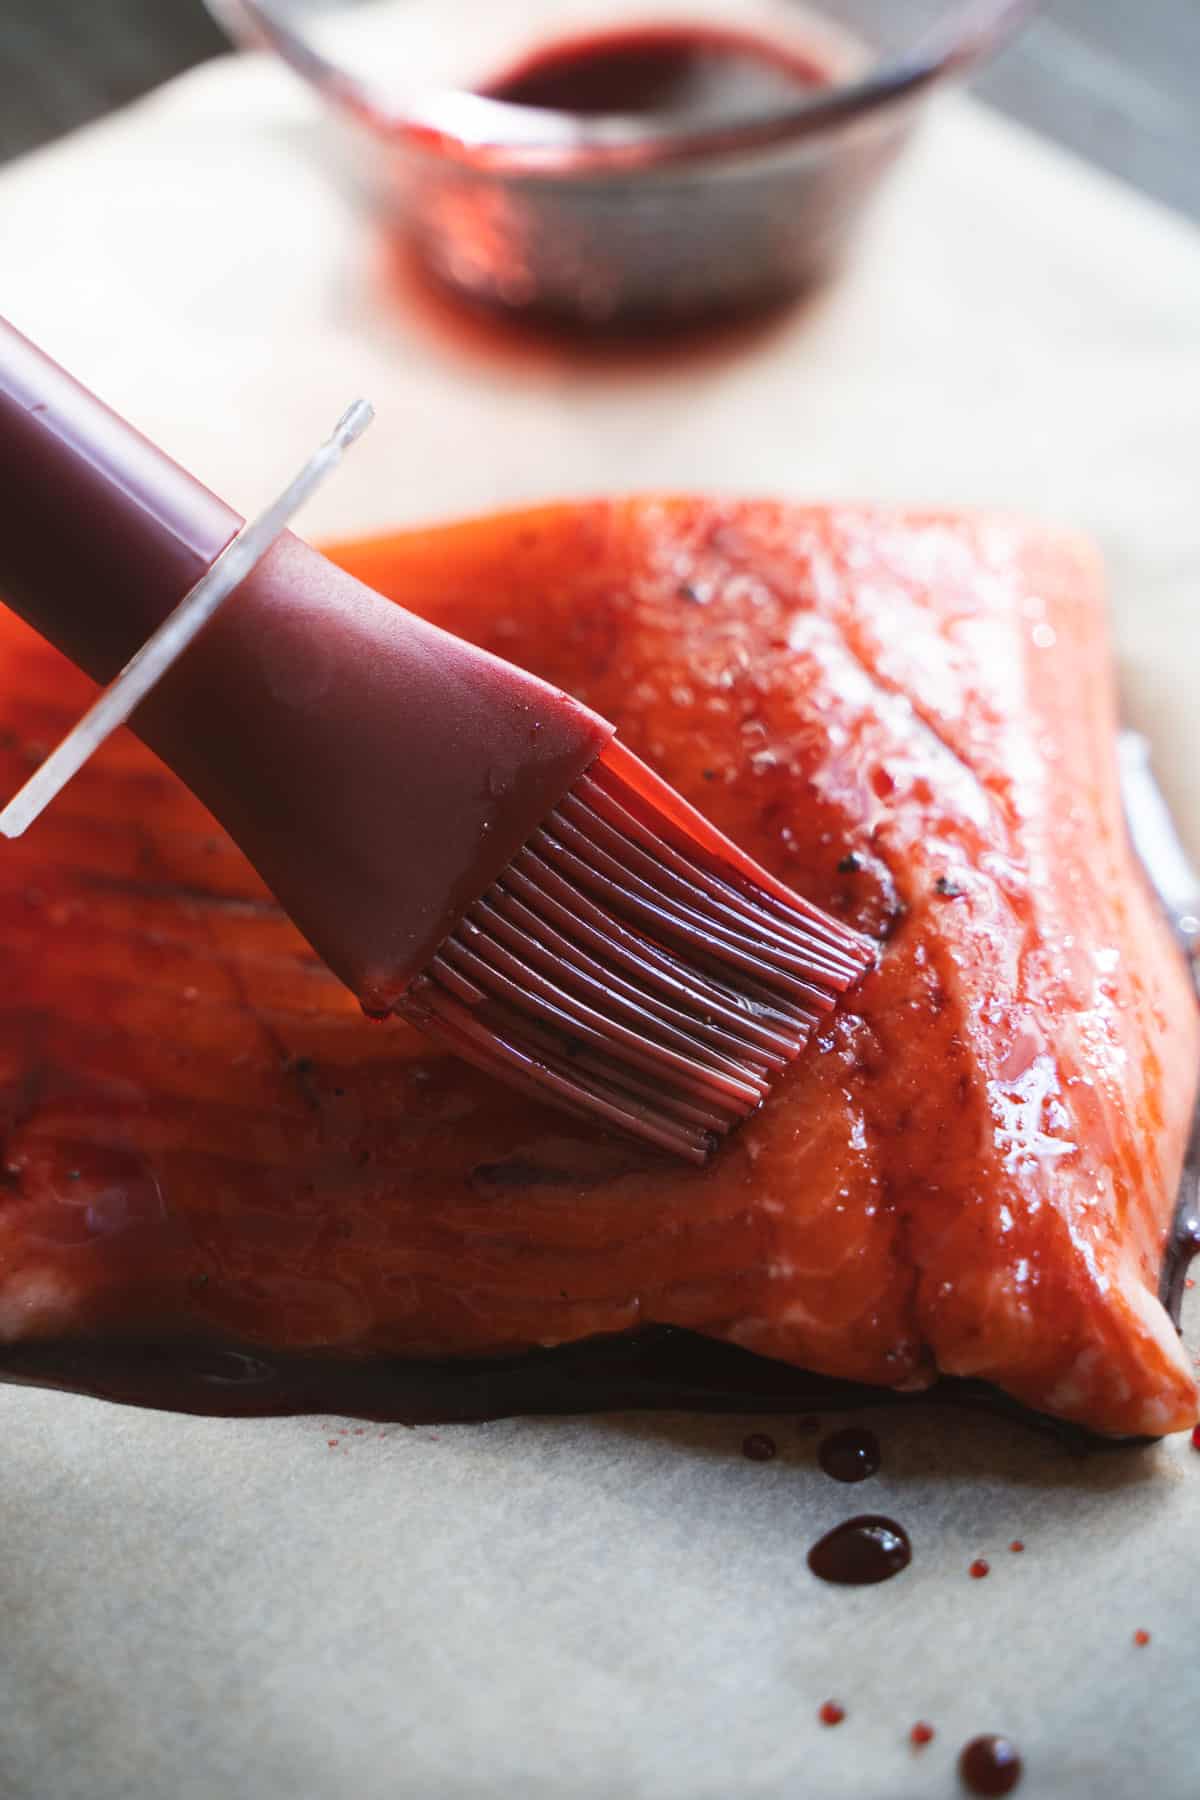 cherry glaze being applied with a basting brush to Salmon on parchment paper.